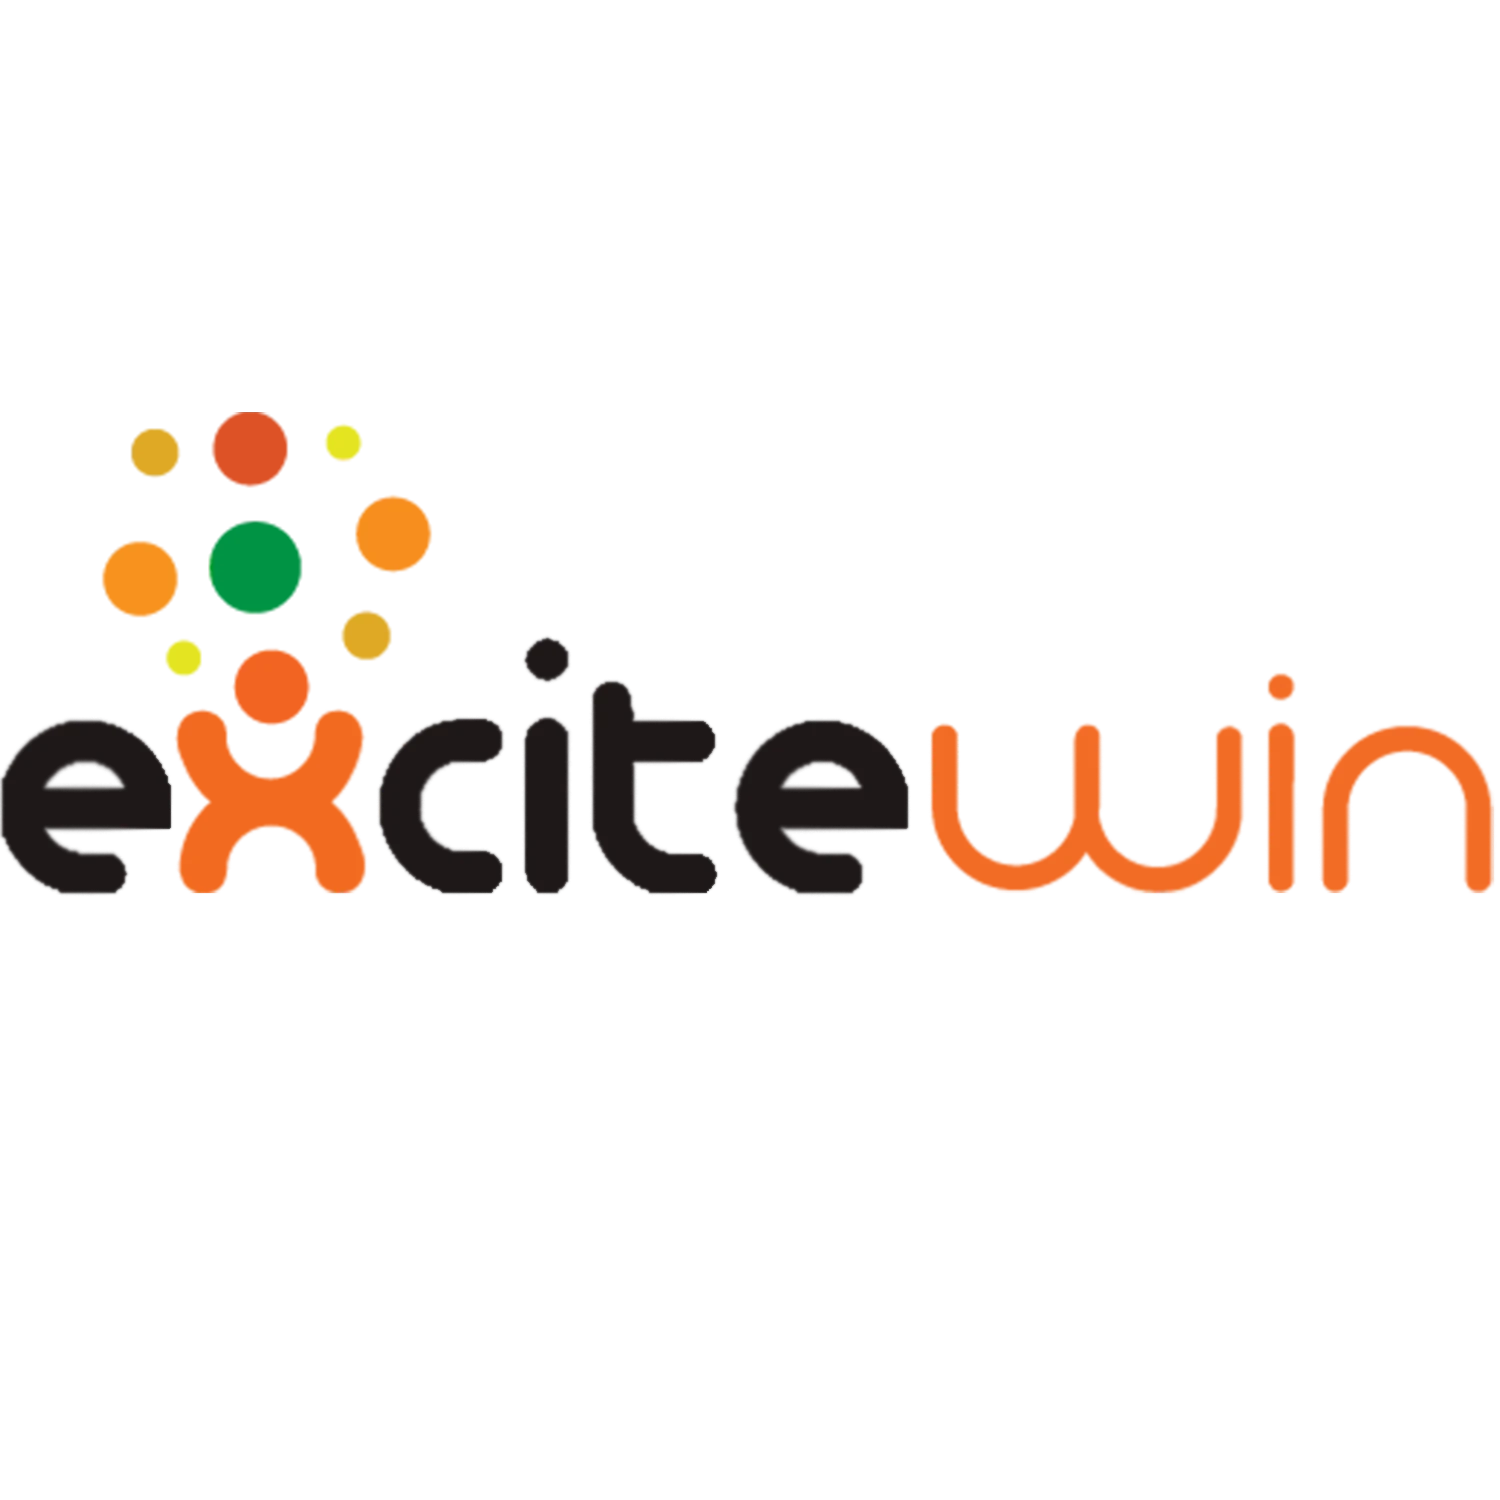 Play and win with Excitewin.